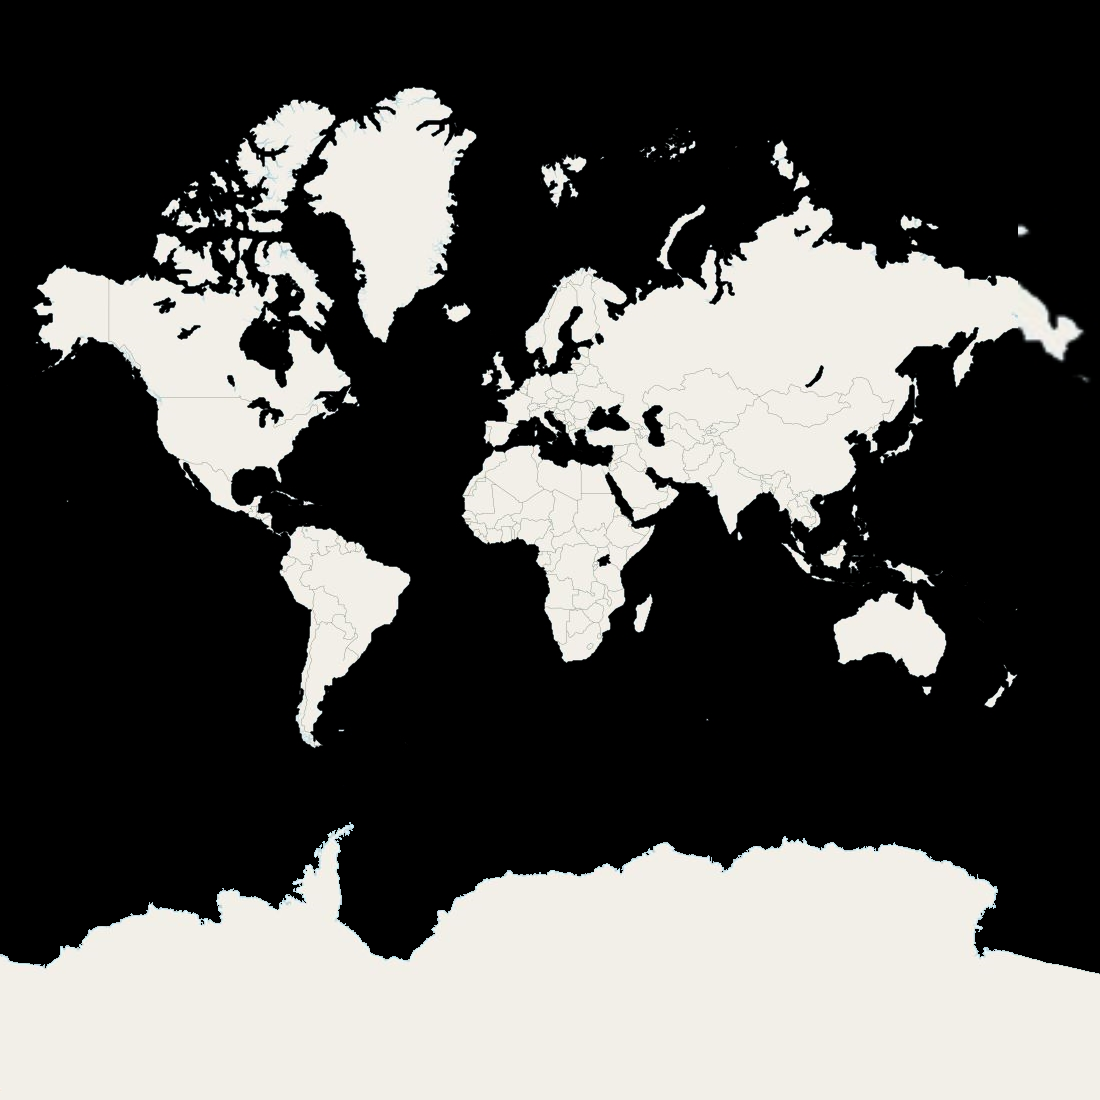 World Map in black and white